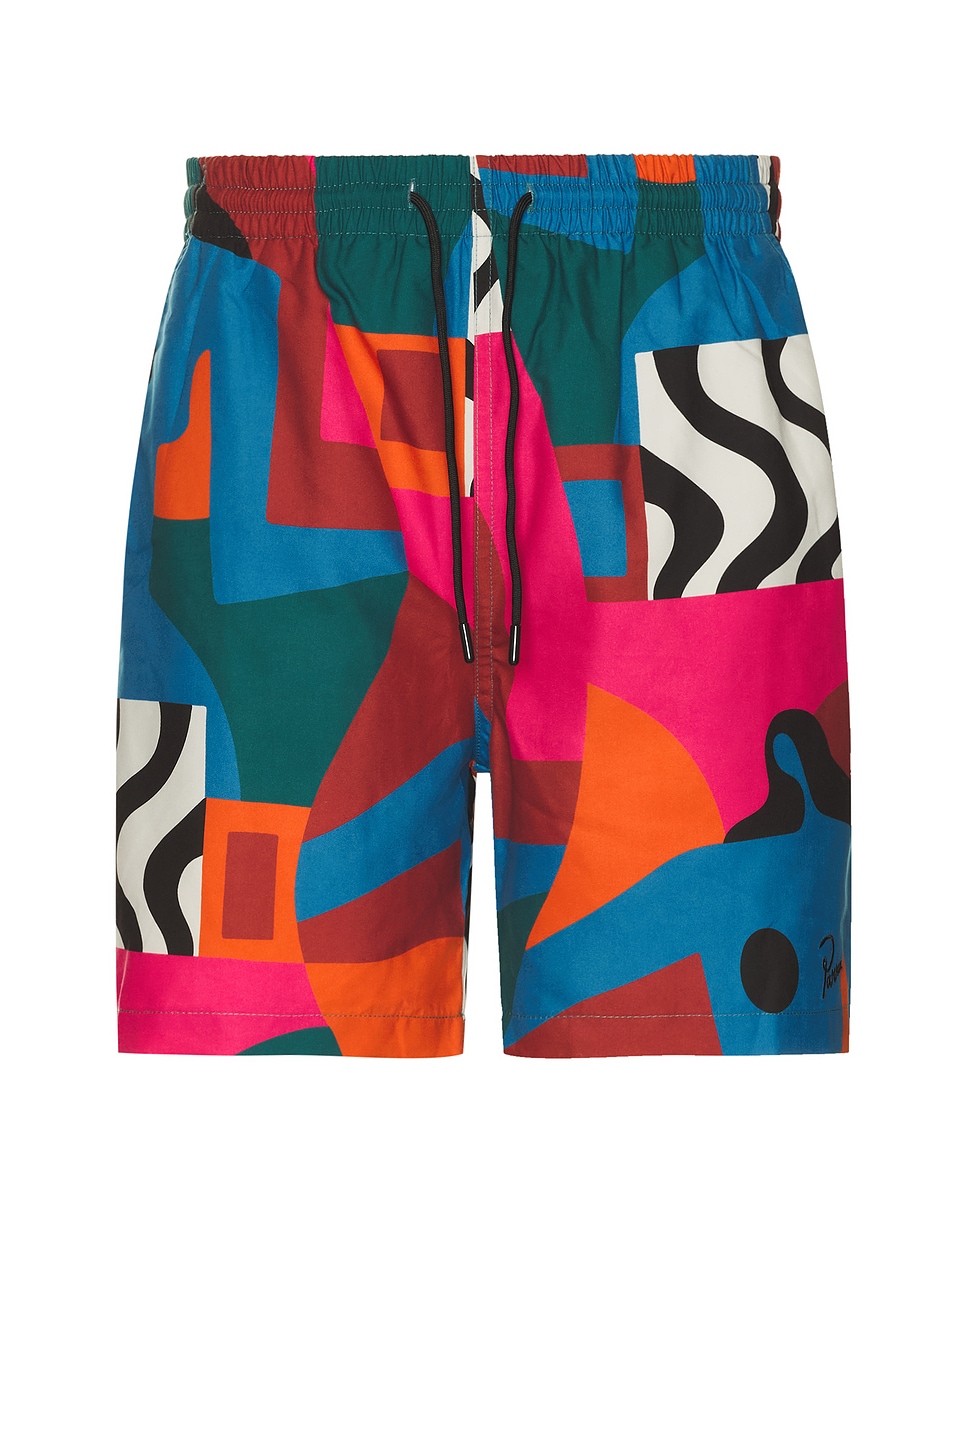 Image 1 of By Parra Distorted Water Swim Shorts in Multi